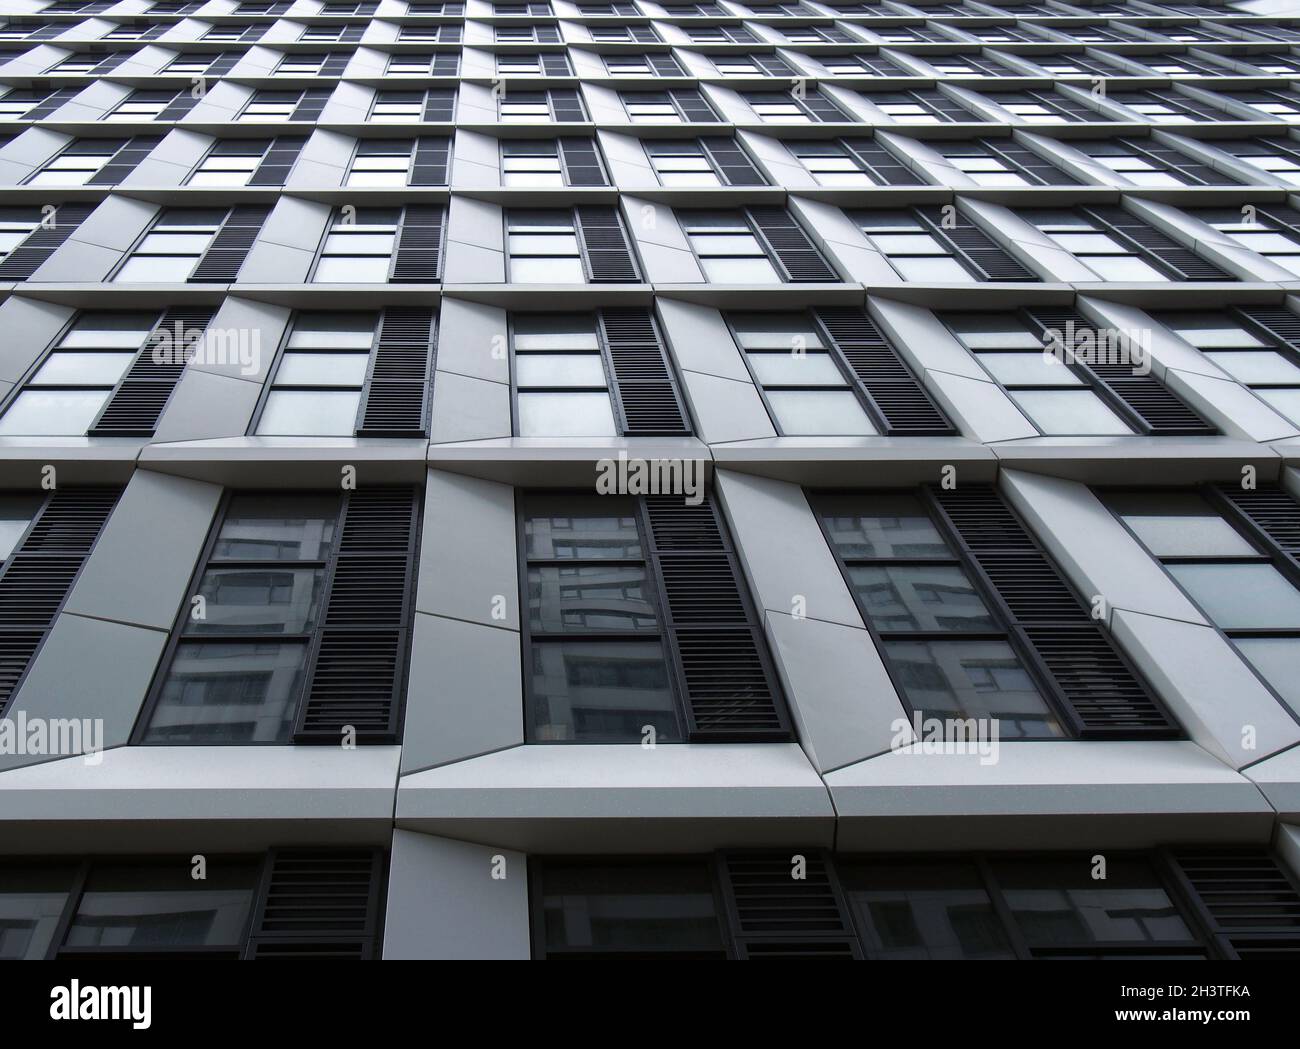 Close up perspective detail of tall high rise modern apartment building with geometric white cladding and dark windows Stock Photo